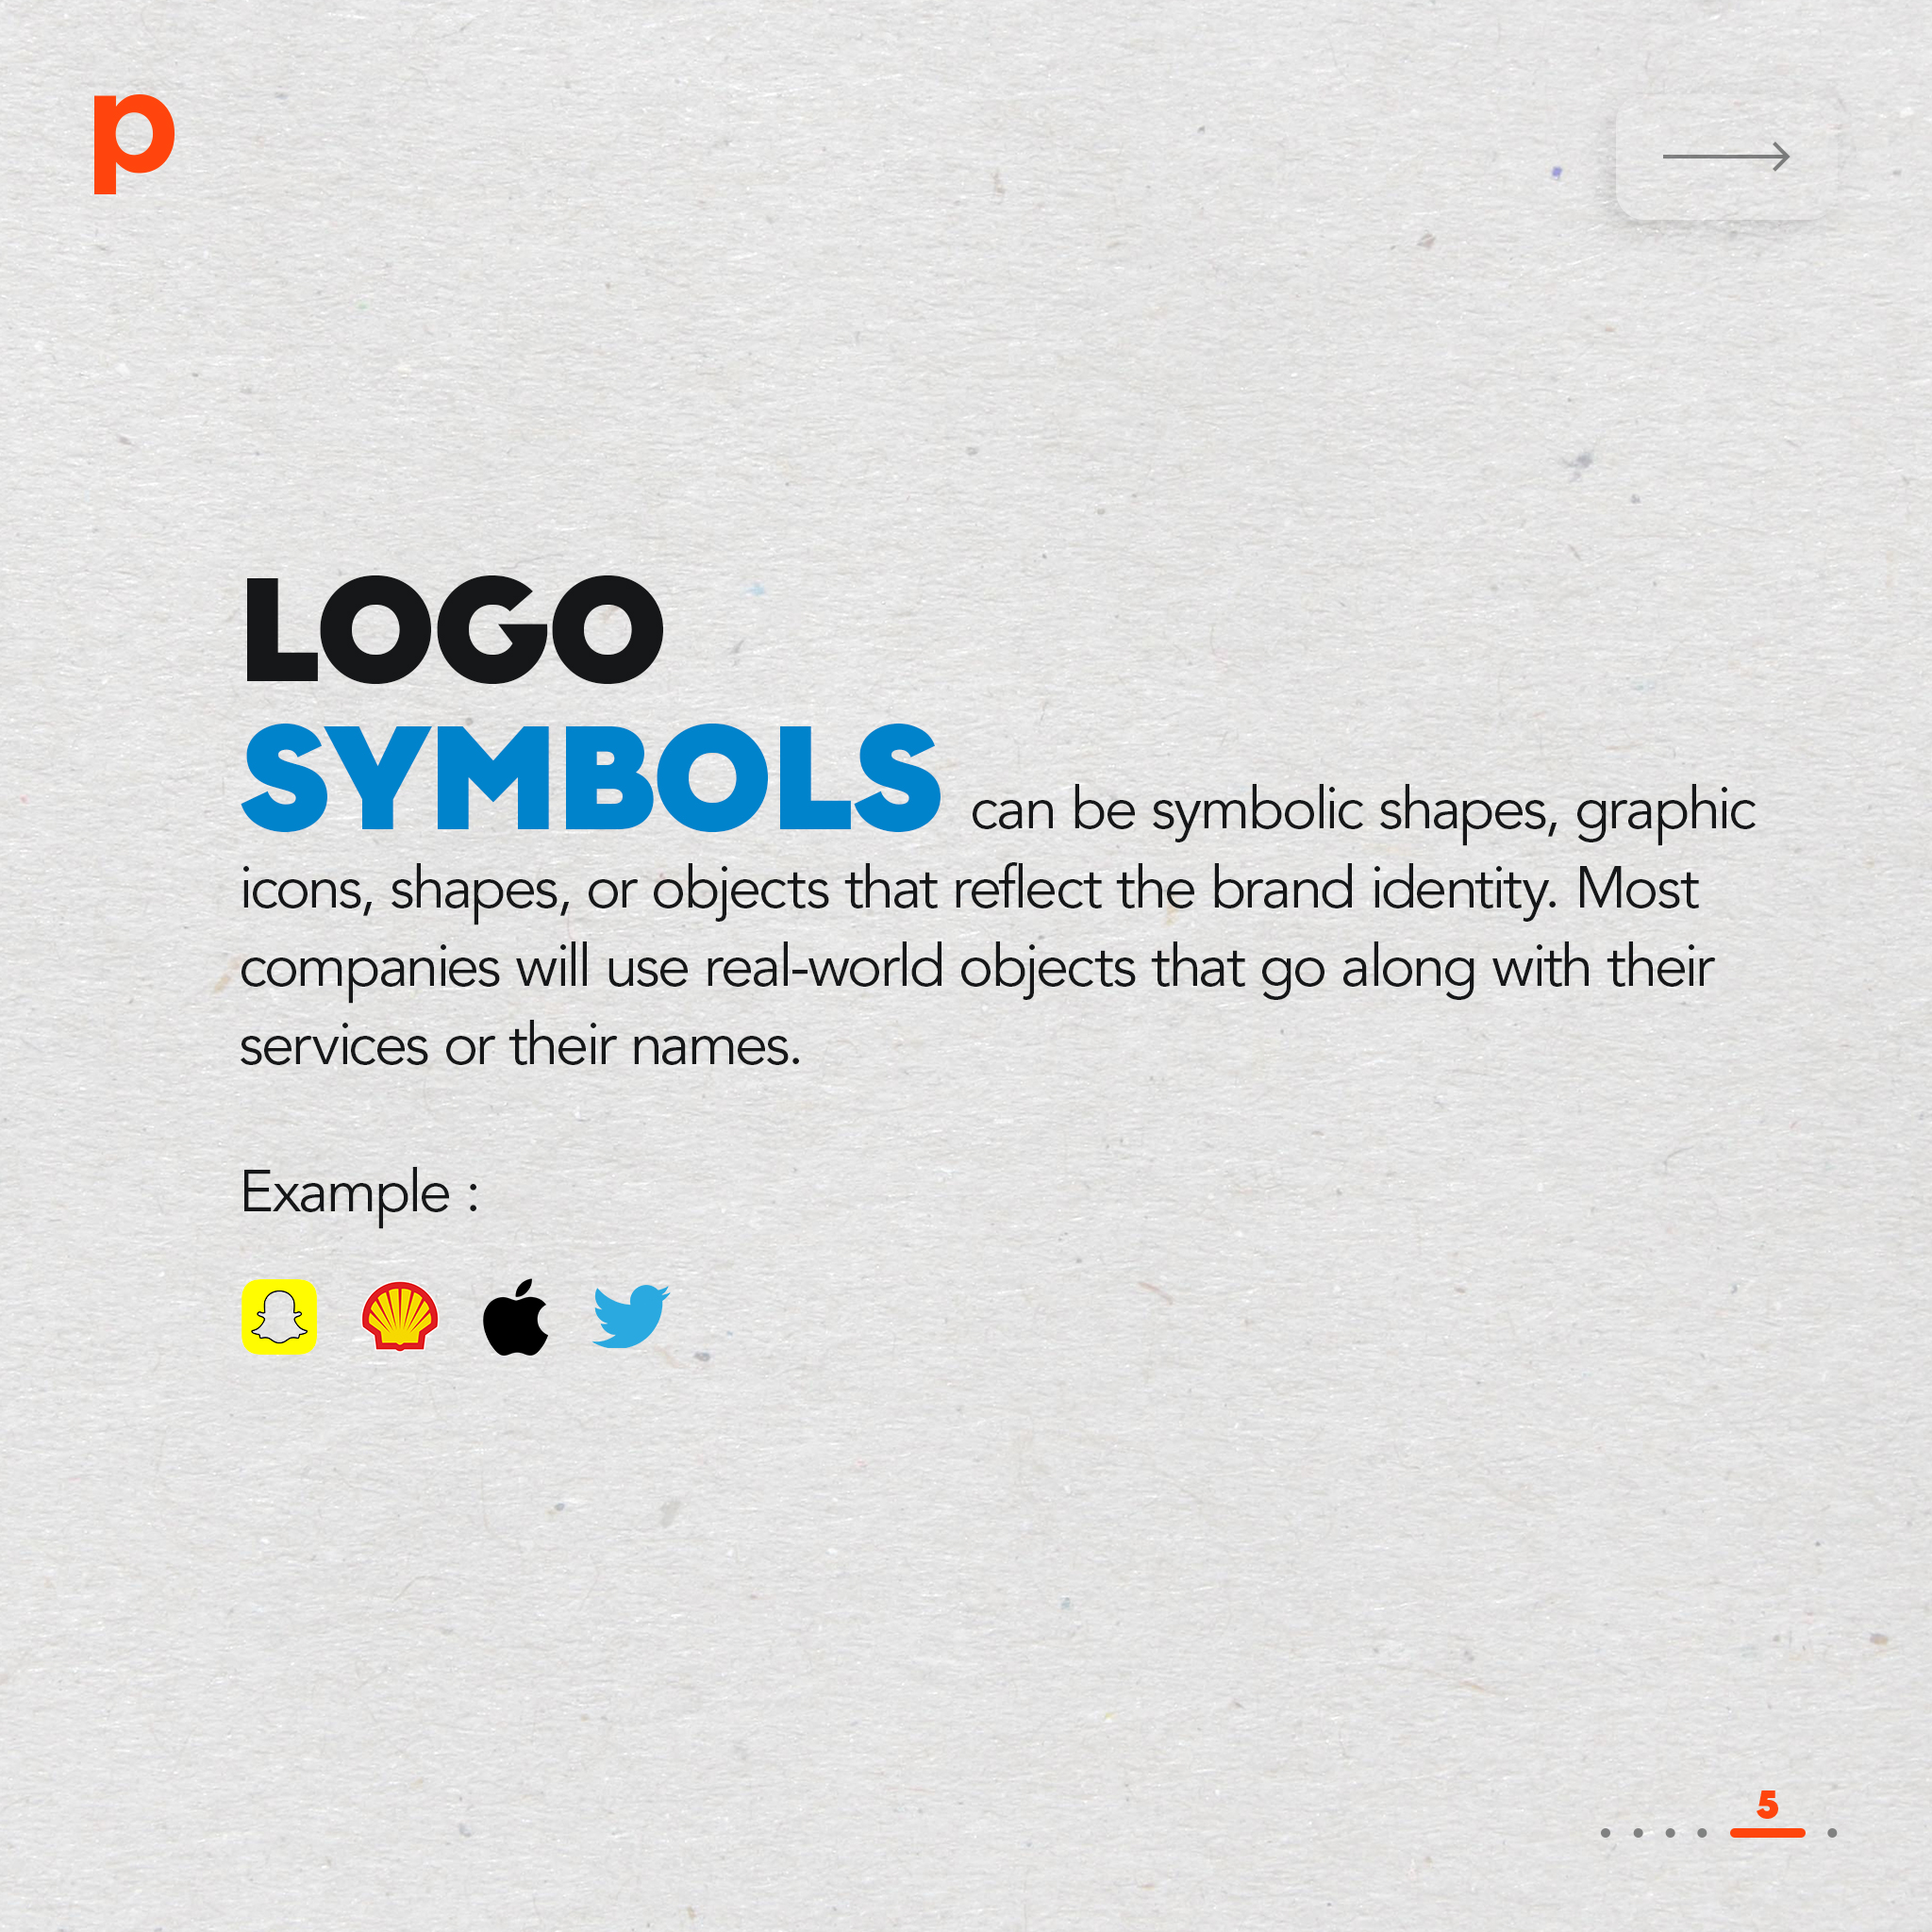 8 Examples of logo you need to know and how to use them effectively [Part 1]